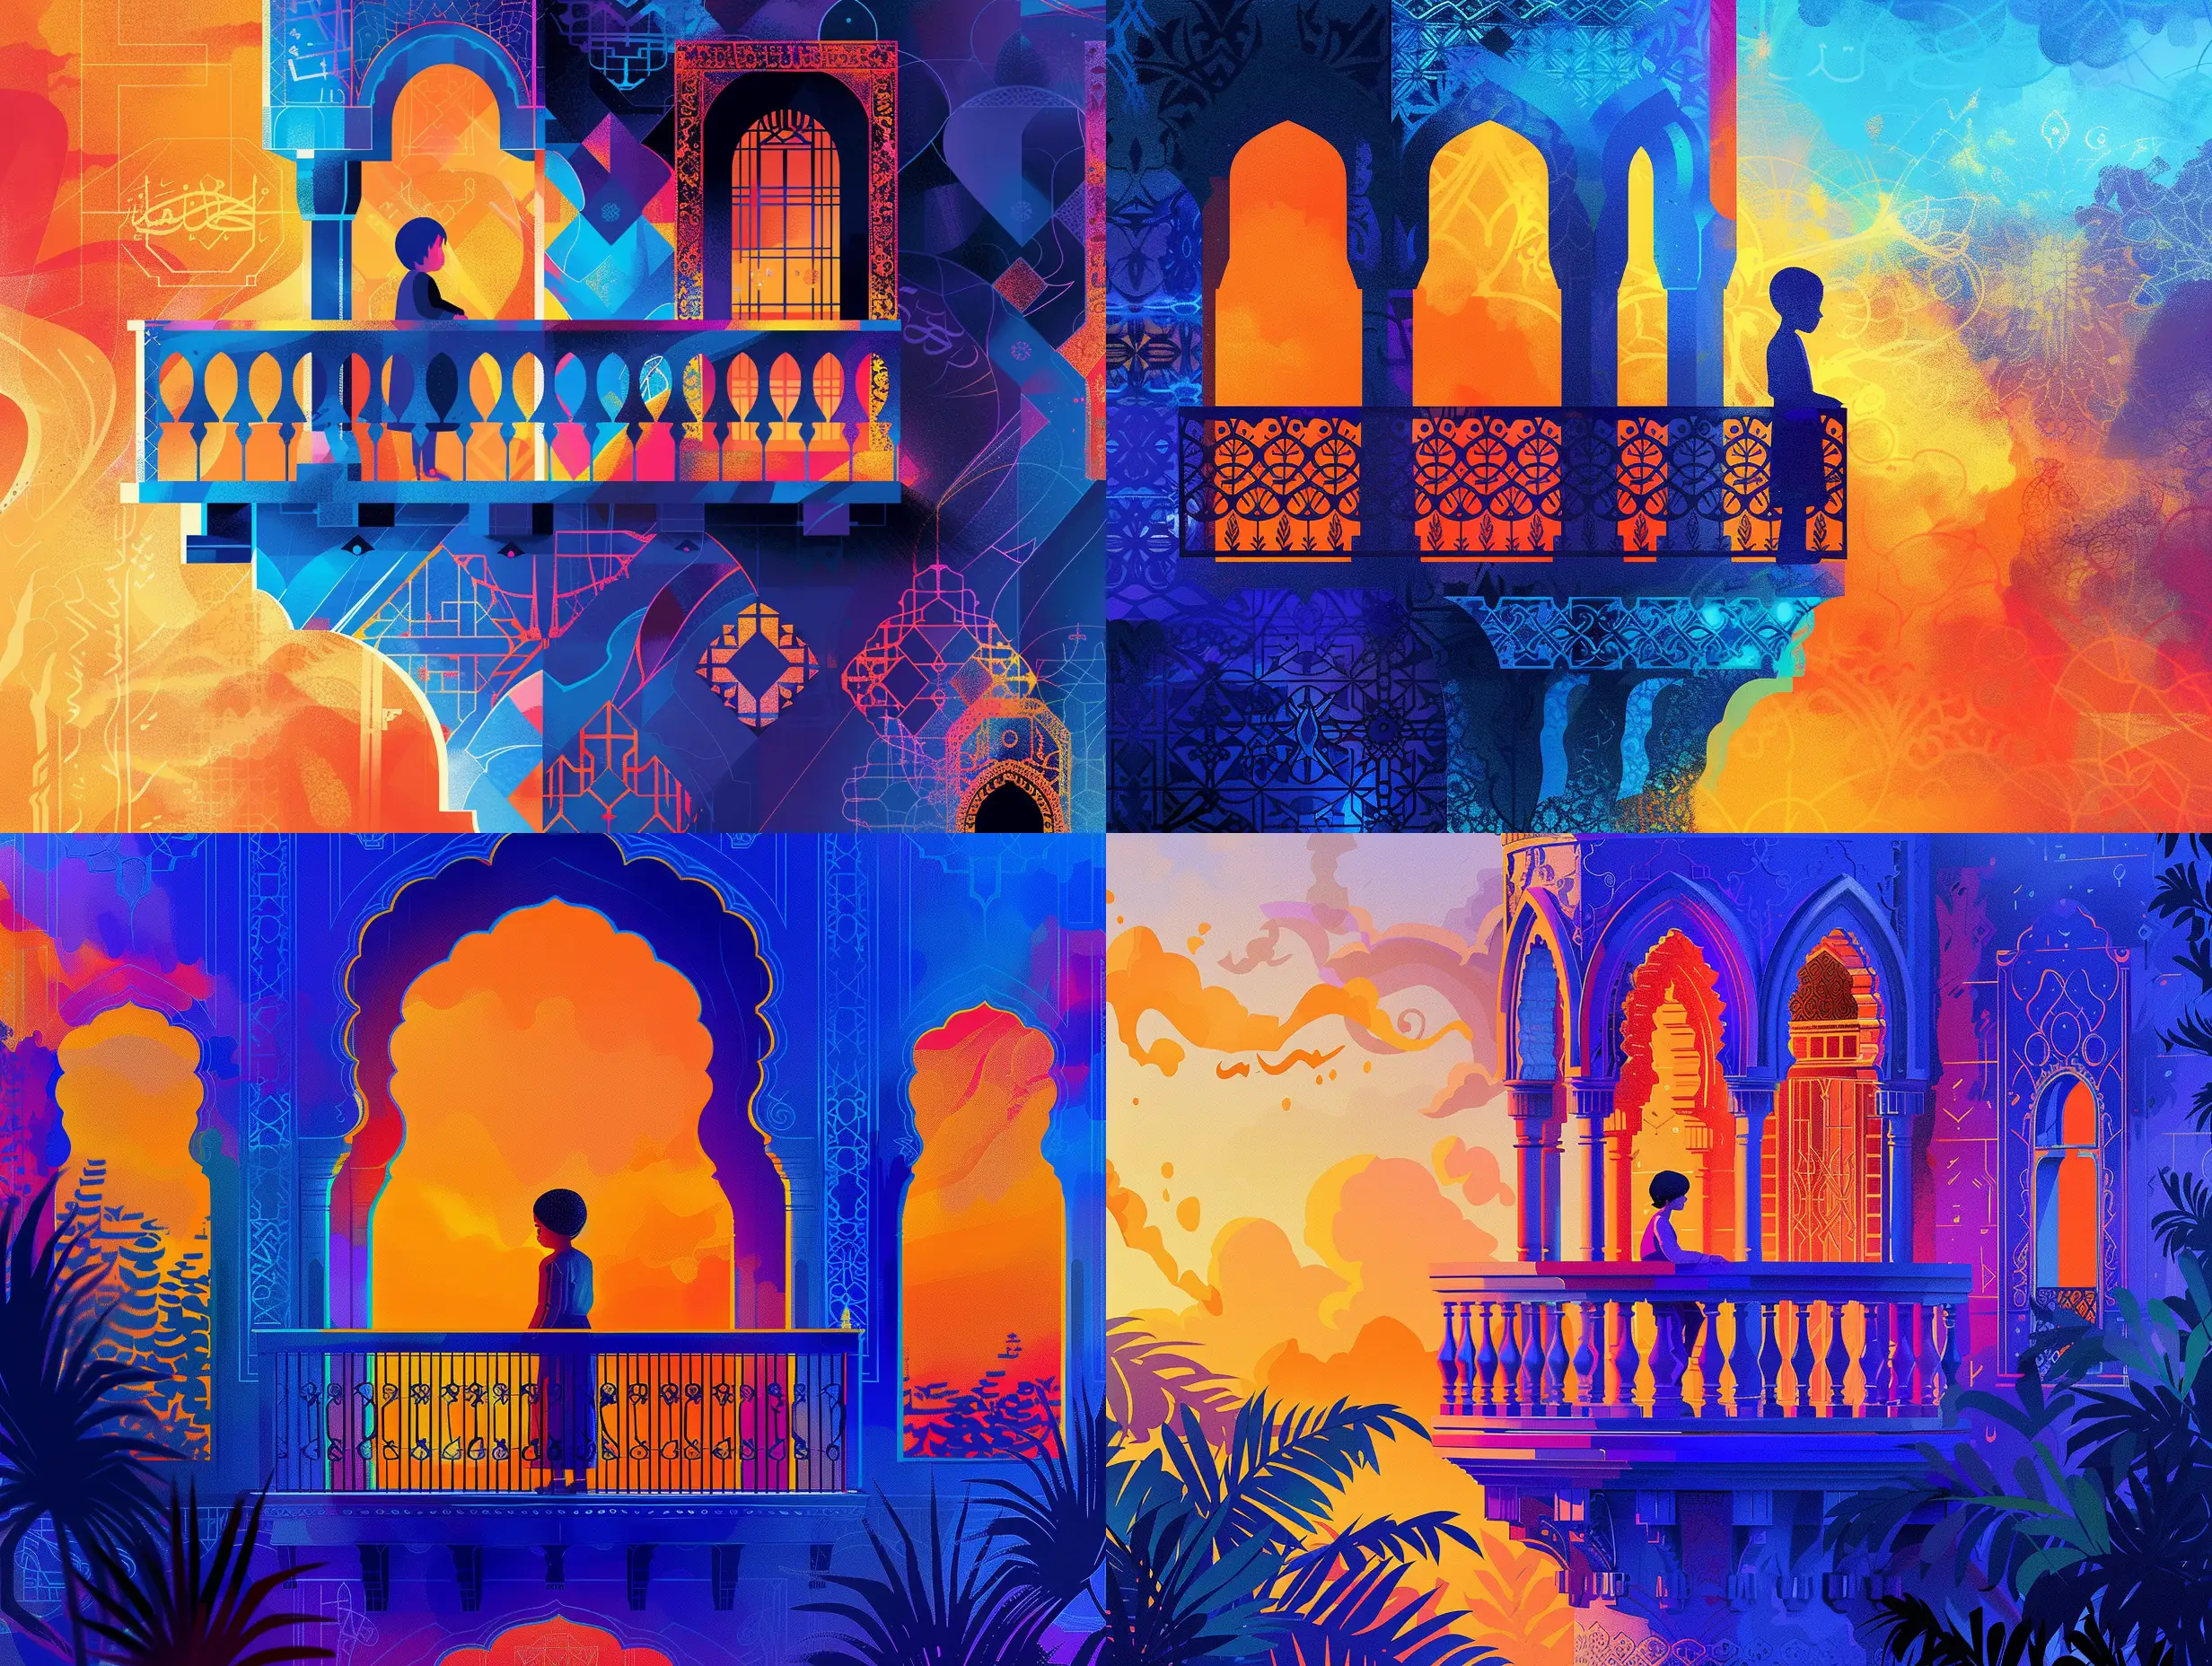 Vibrant-Digital-Art-of-Child-on-Balcony-with-Islamic-Architecture-and-Colorful-Gradients